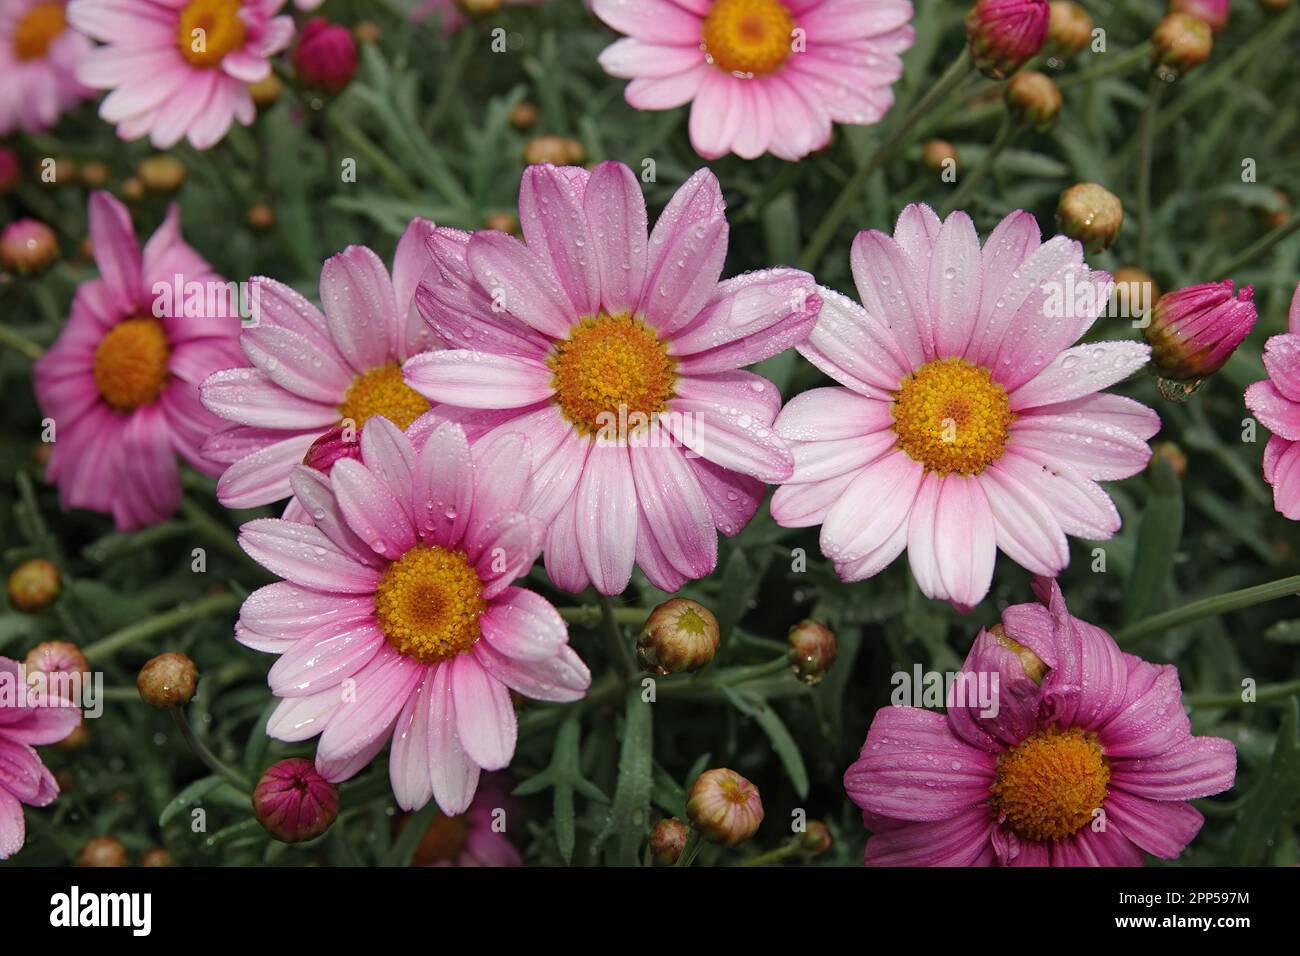 Colorful closeup on a rich flowering soft pink flowers of the Paris or Marguerite daisy, Argyranthemum frutescens in the garden Stock Photo